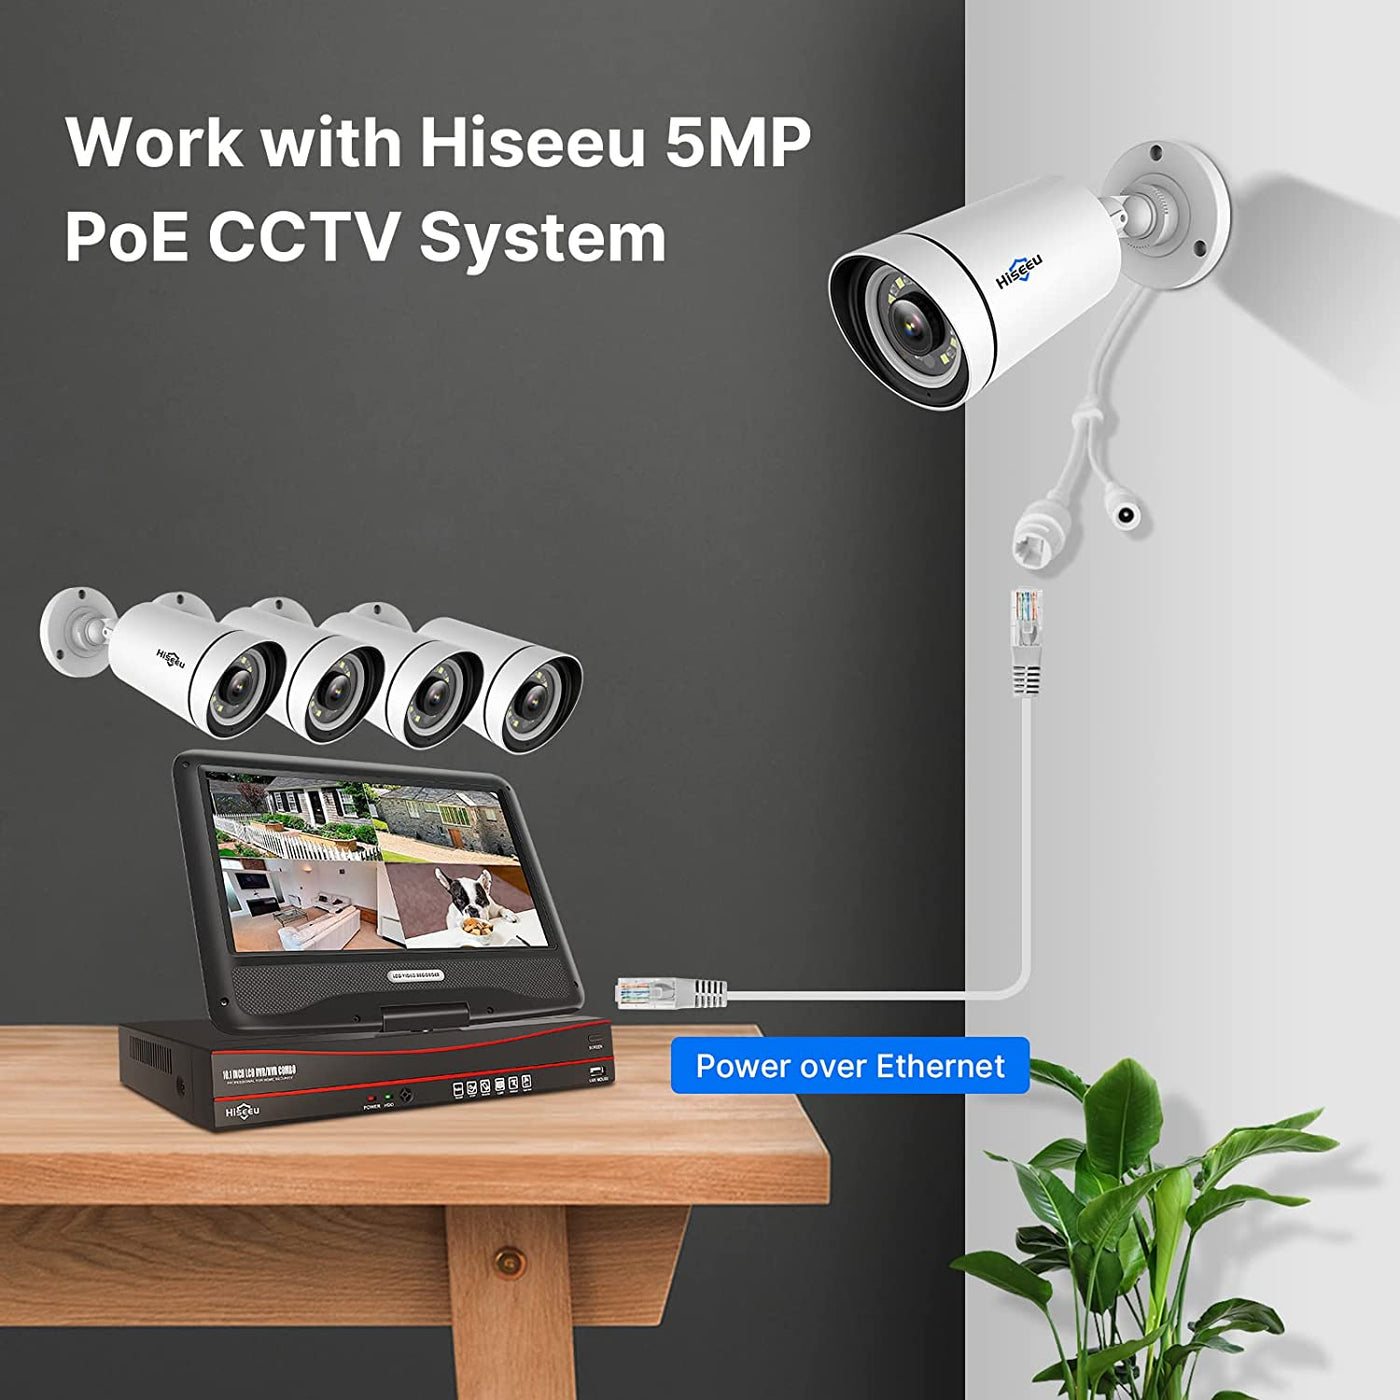 Hiseeu 5MP PoE Security Camera Color Night Vision,IP66 Waterproof Outdoor Security Camera,Two-way Audio,Smart Alerts,Work with Hiseeu PoE CCTV System